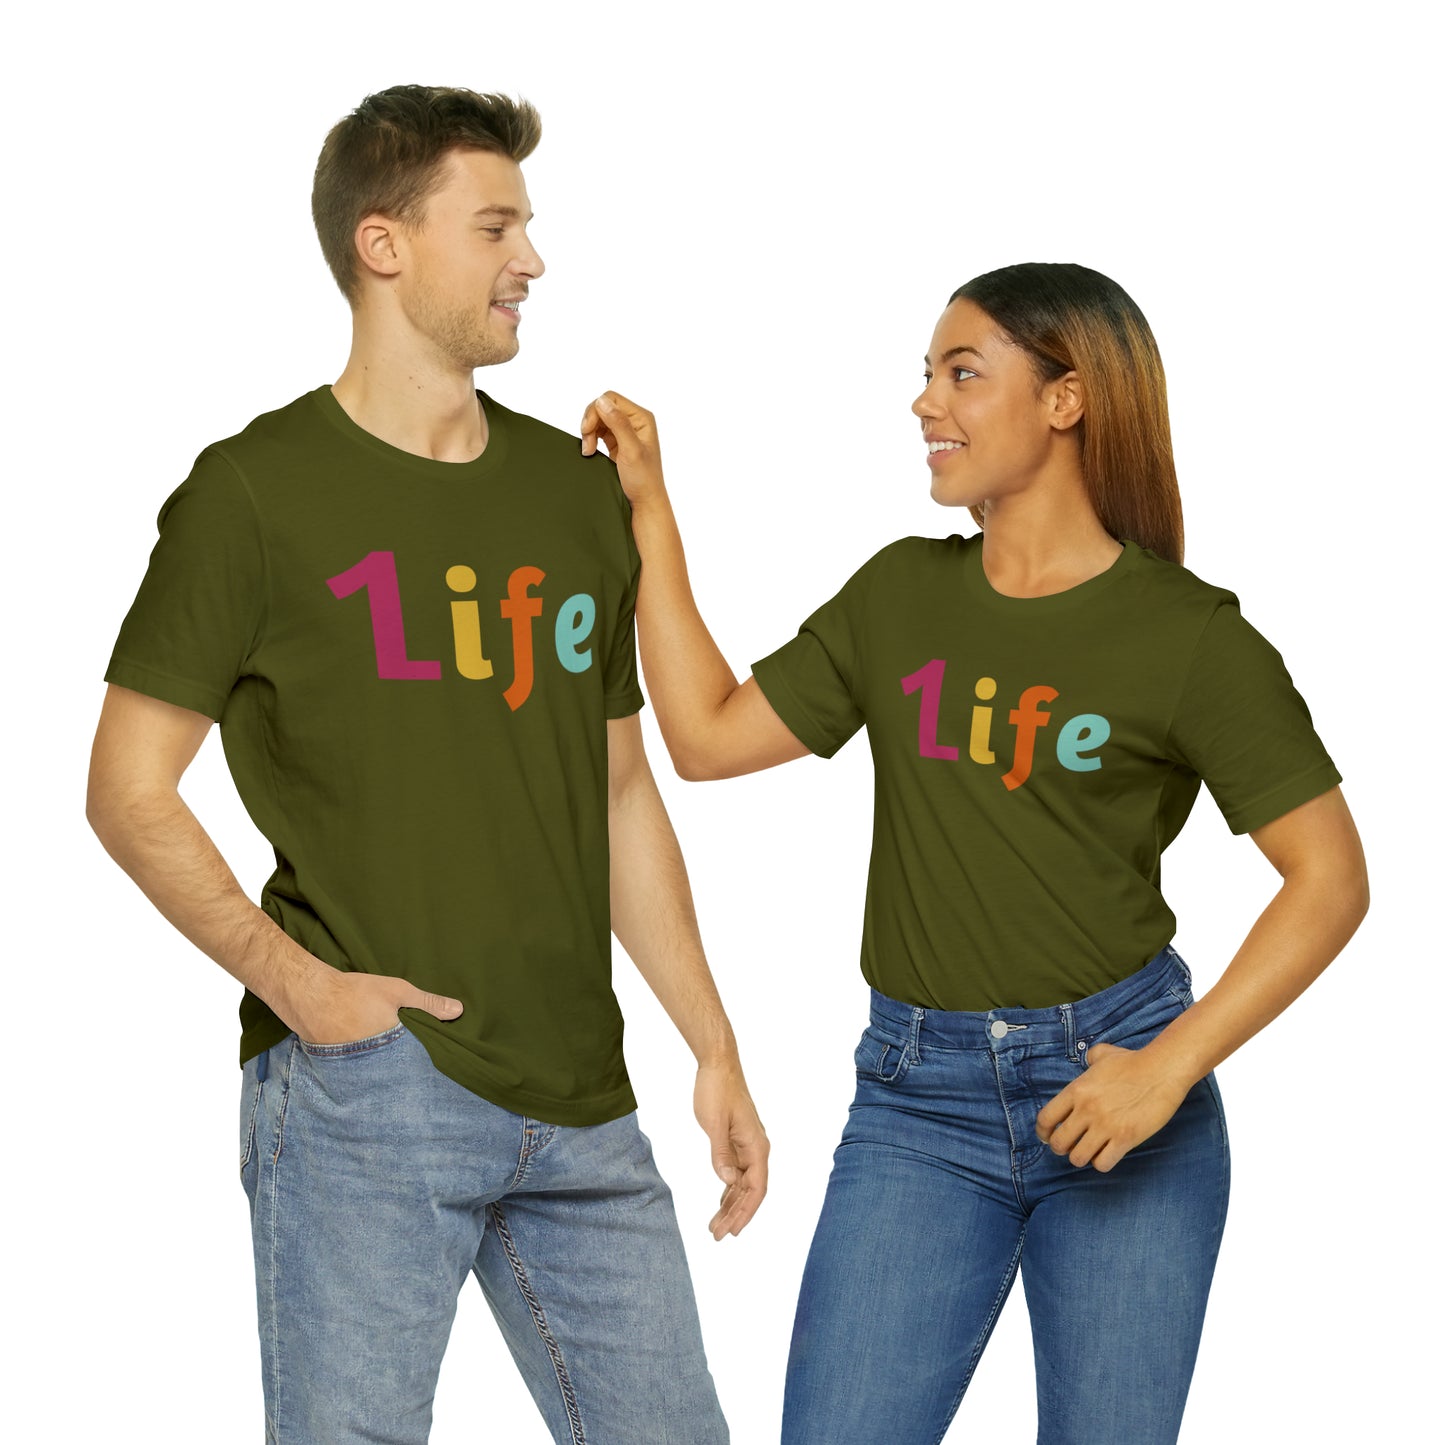 One life Shirt 1life shirt Live Your Life You Only Have One Life To Live Shirt